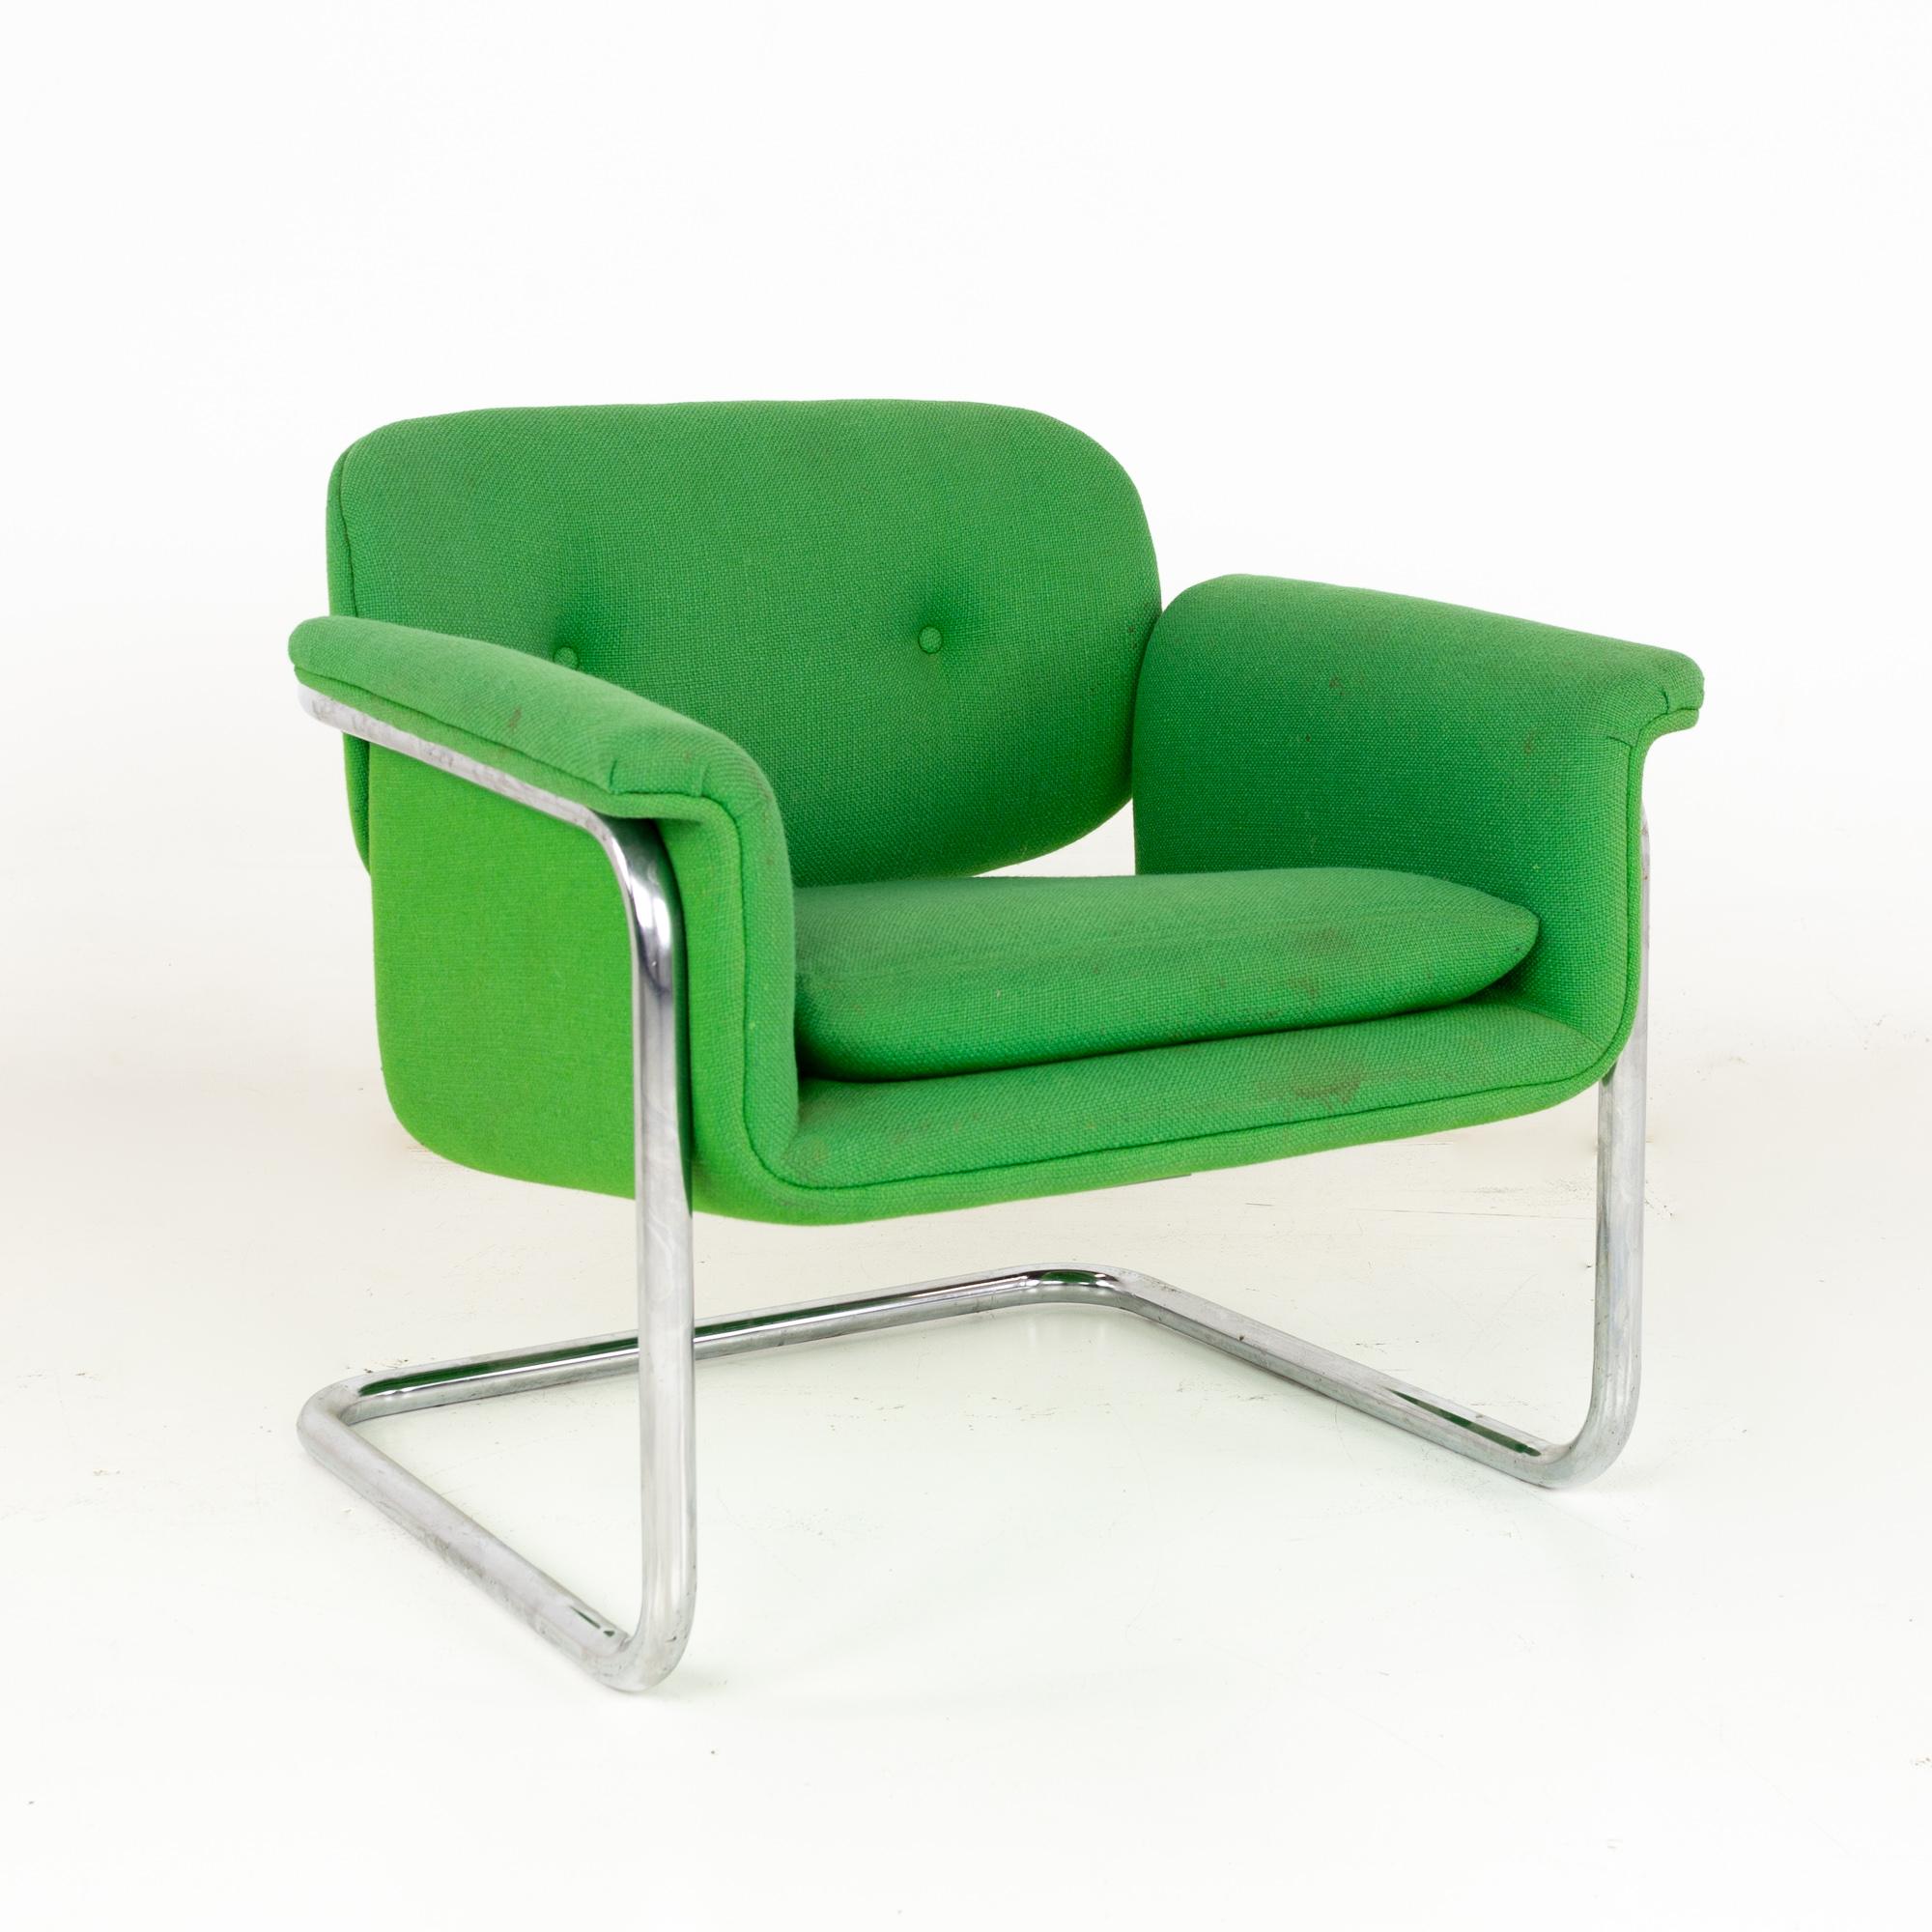 American Mid Century Green and Chrome Cantilever Lounge Chairs, a Pair